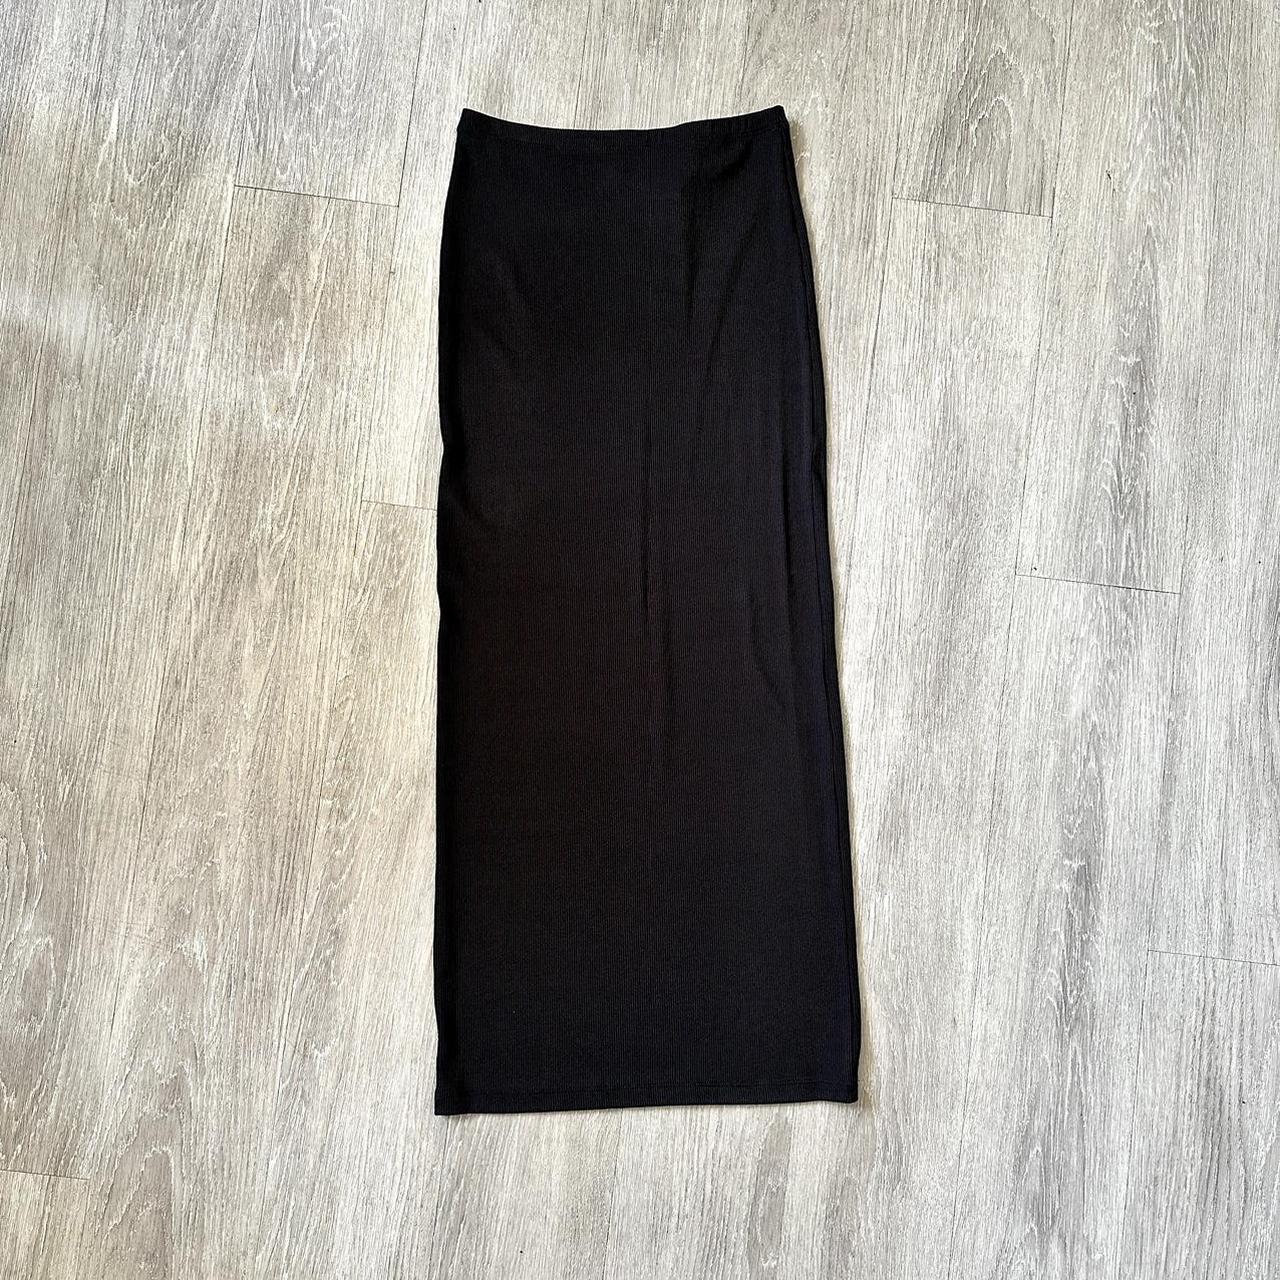 LONG RIBBED SKIRT ️Price is firm for this item, any... - Depop